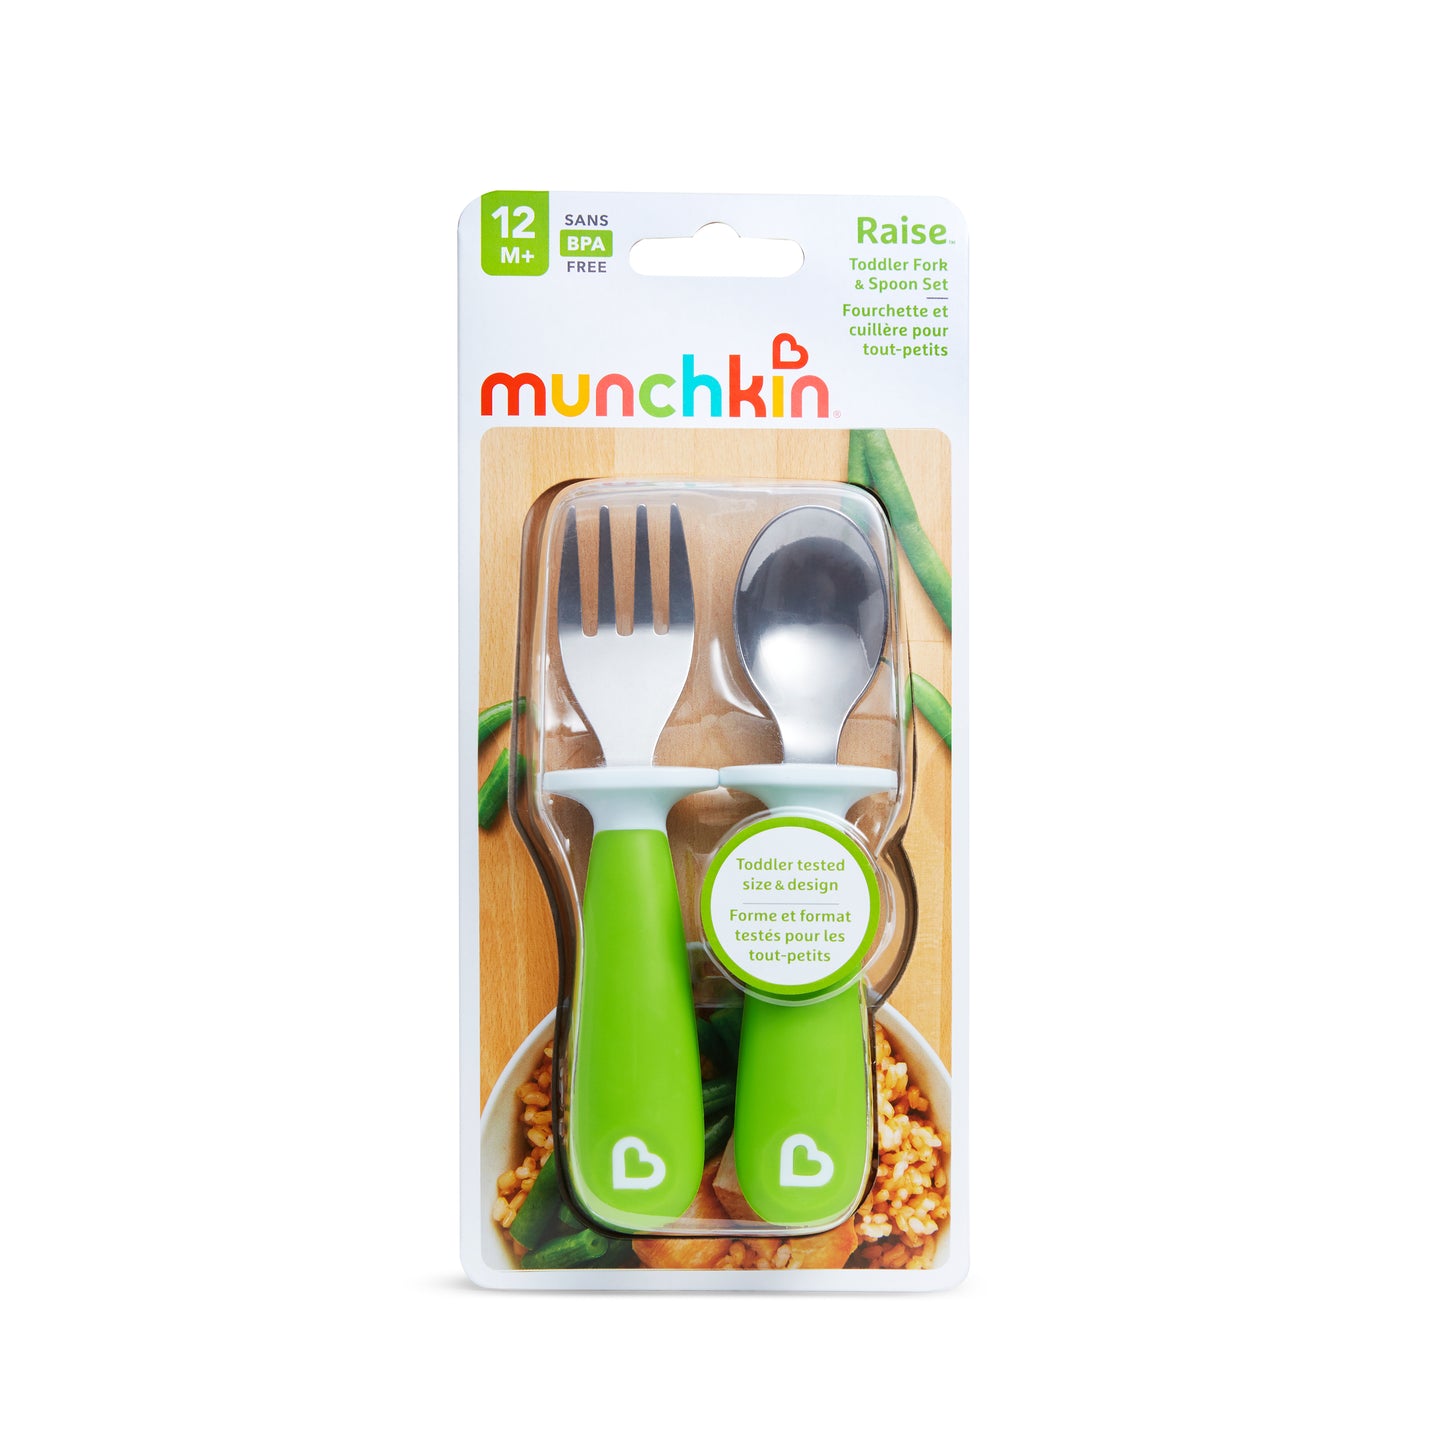 Raise Toddler Fork and Spoon Set